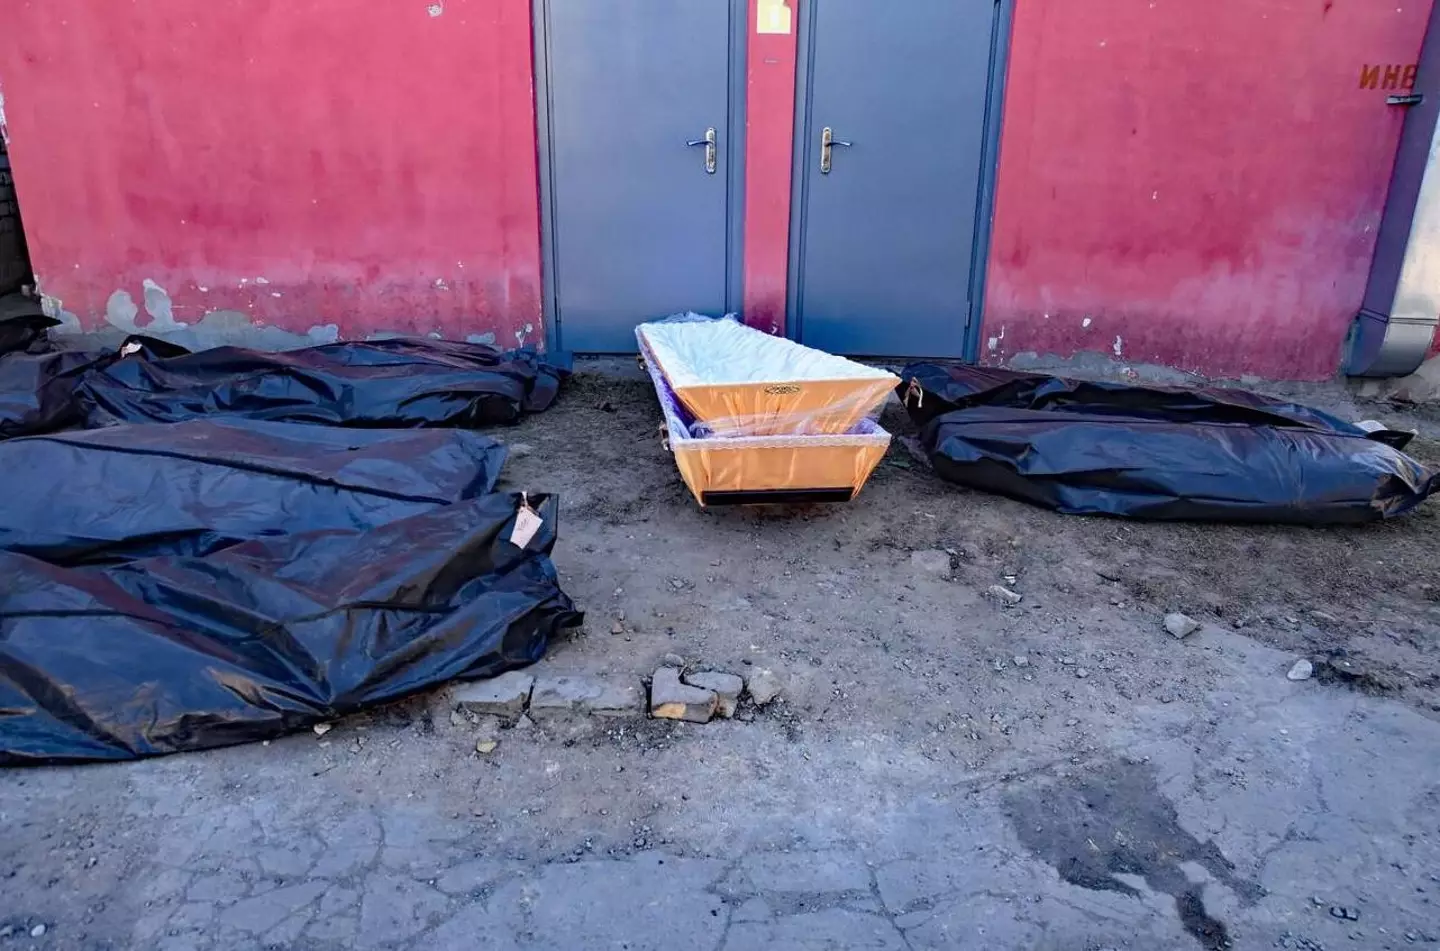 Bodies outside of a morgue in Ukraine.